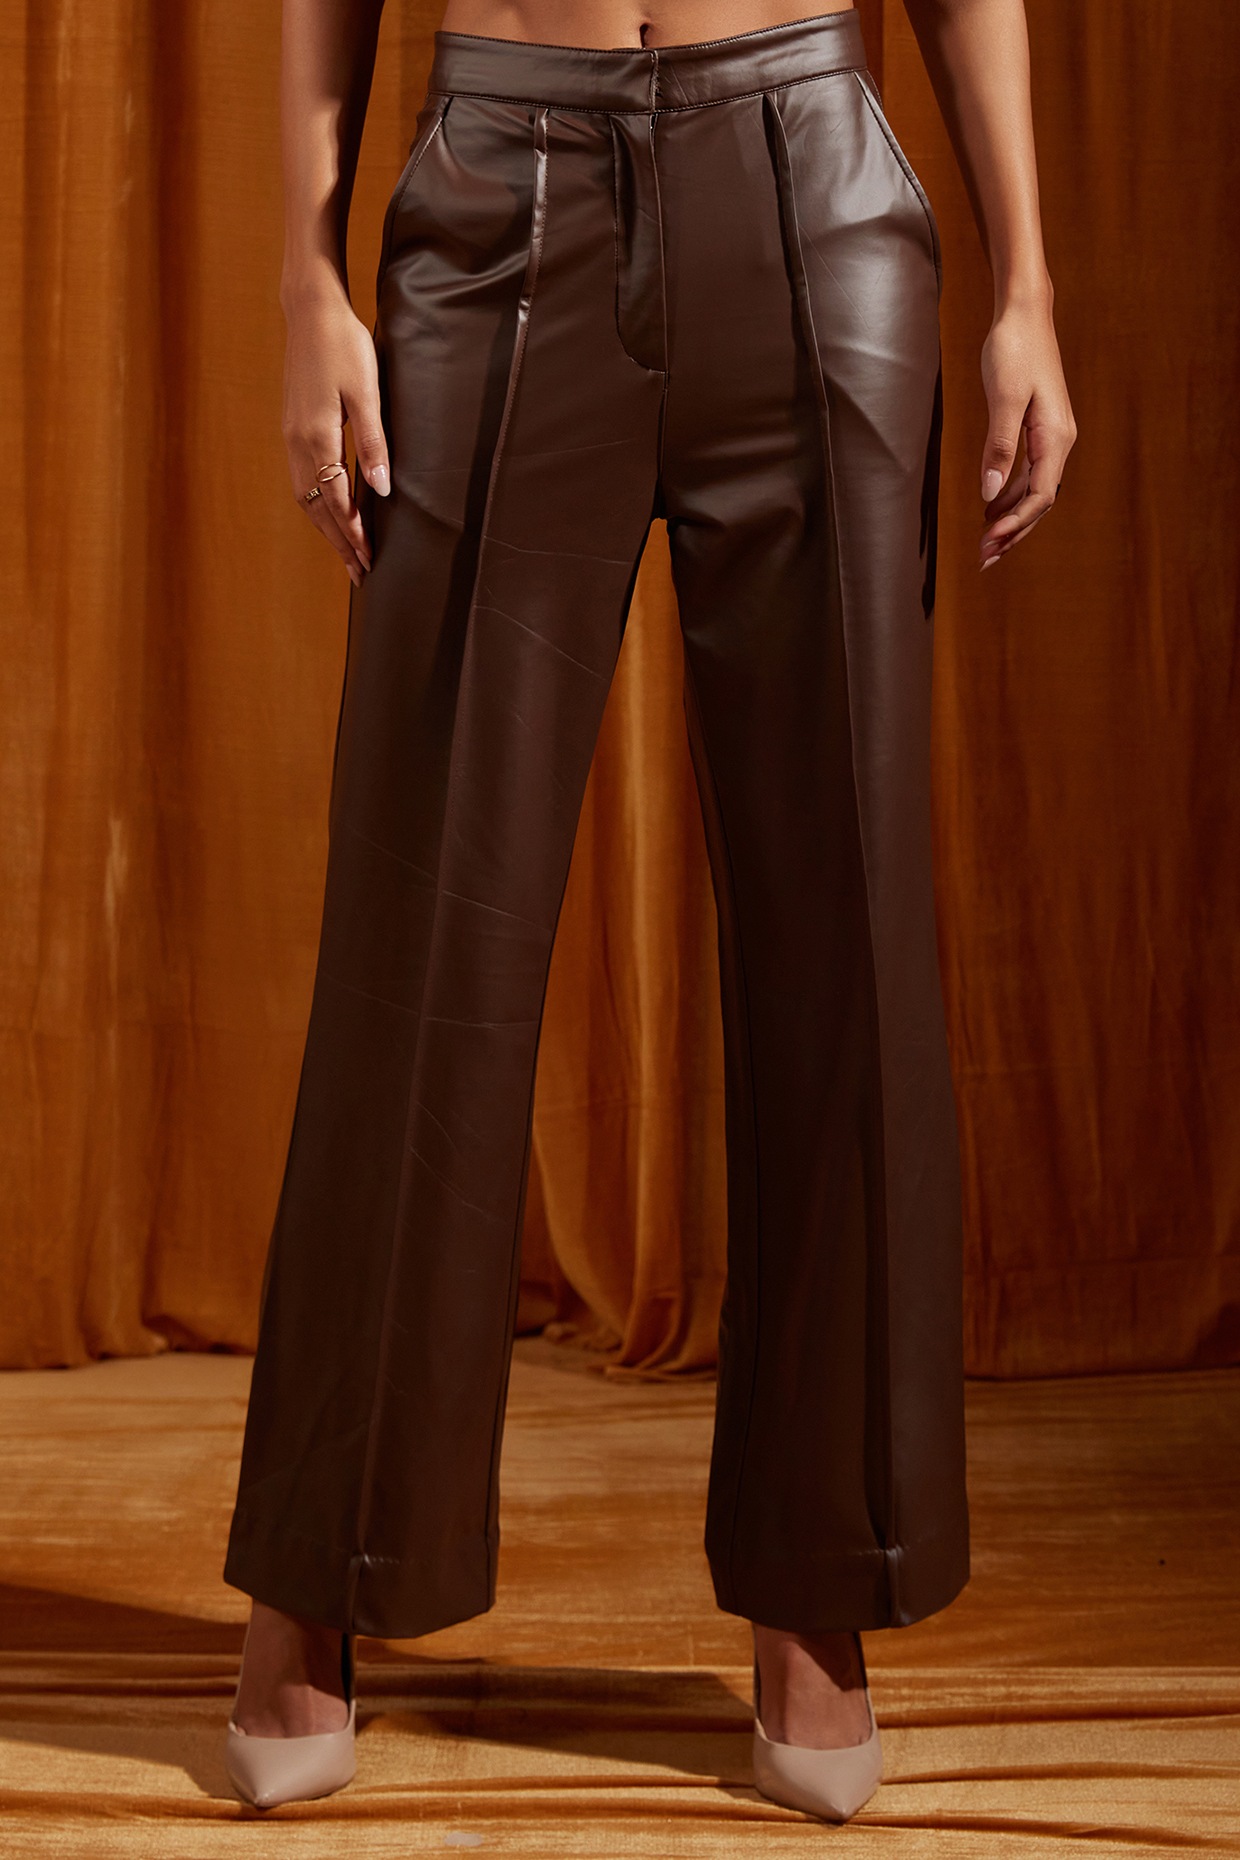 Flounce London pleated wide leg satin trousers in chocolate brown | ASOS